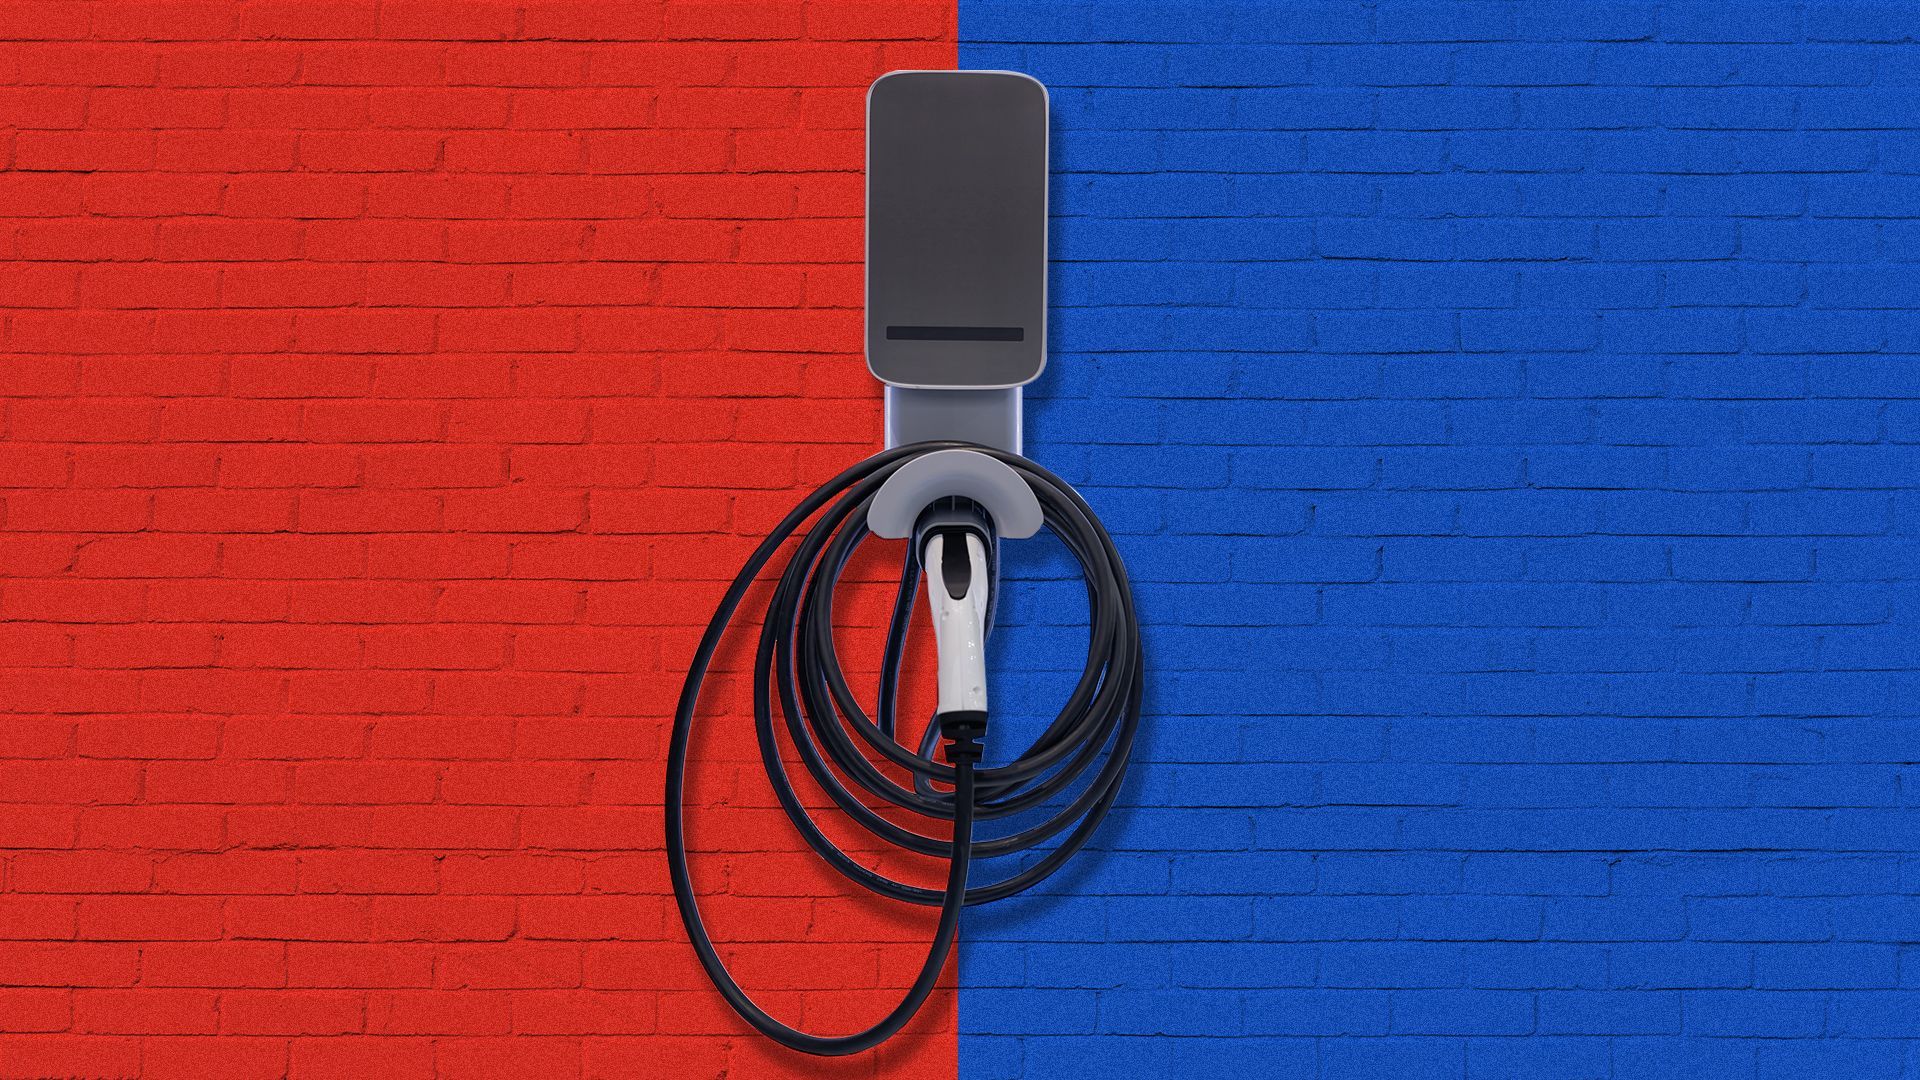 Illustration of a brick wall in red and blue with an EV charger hanging in the center. 